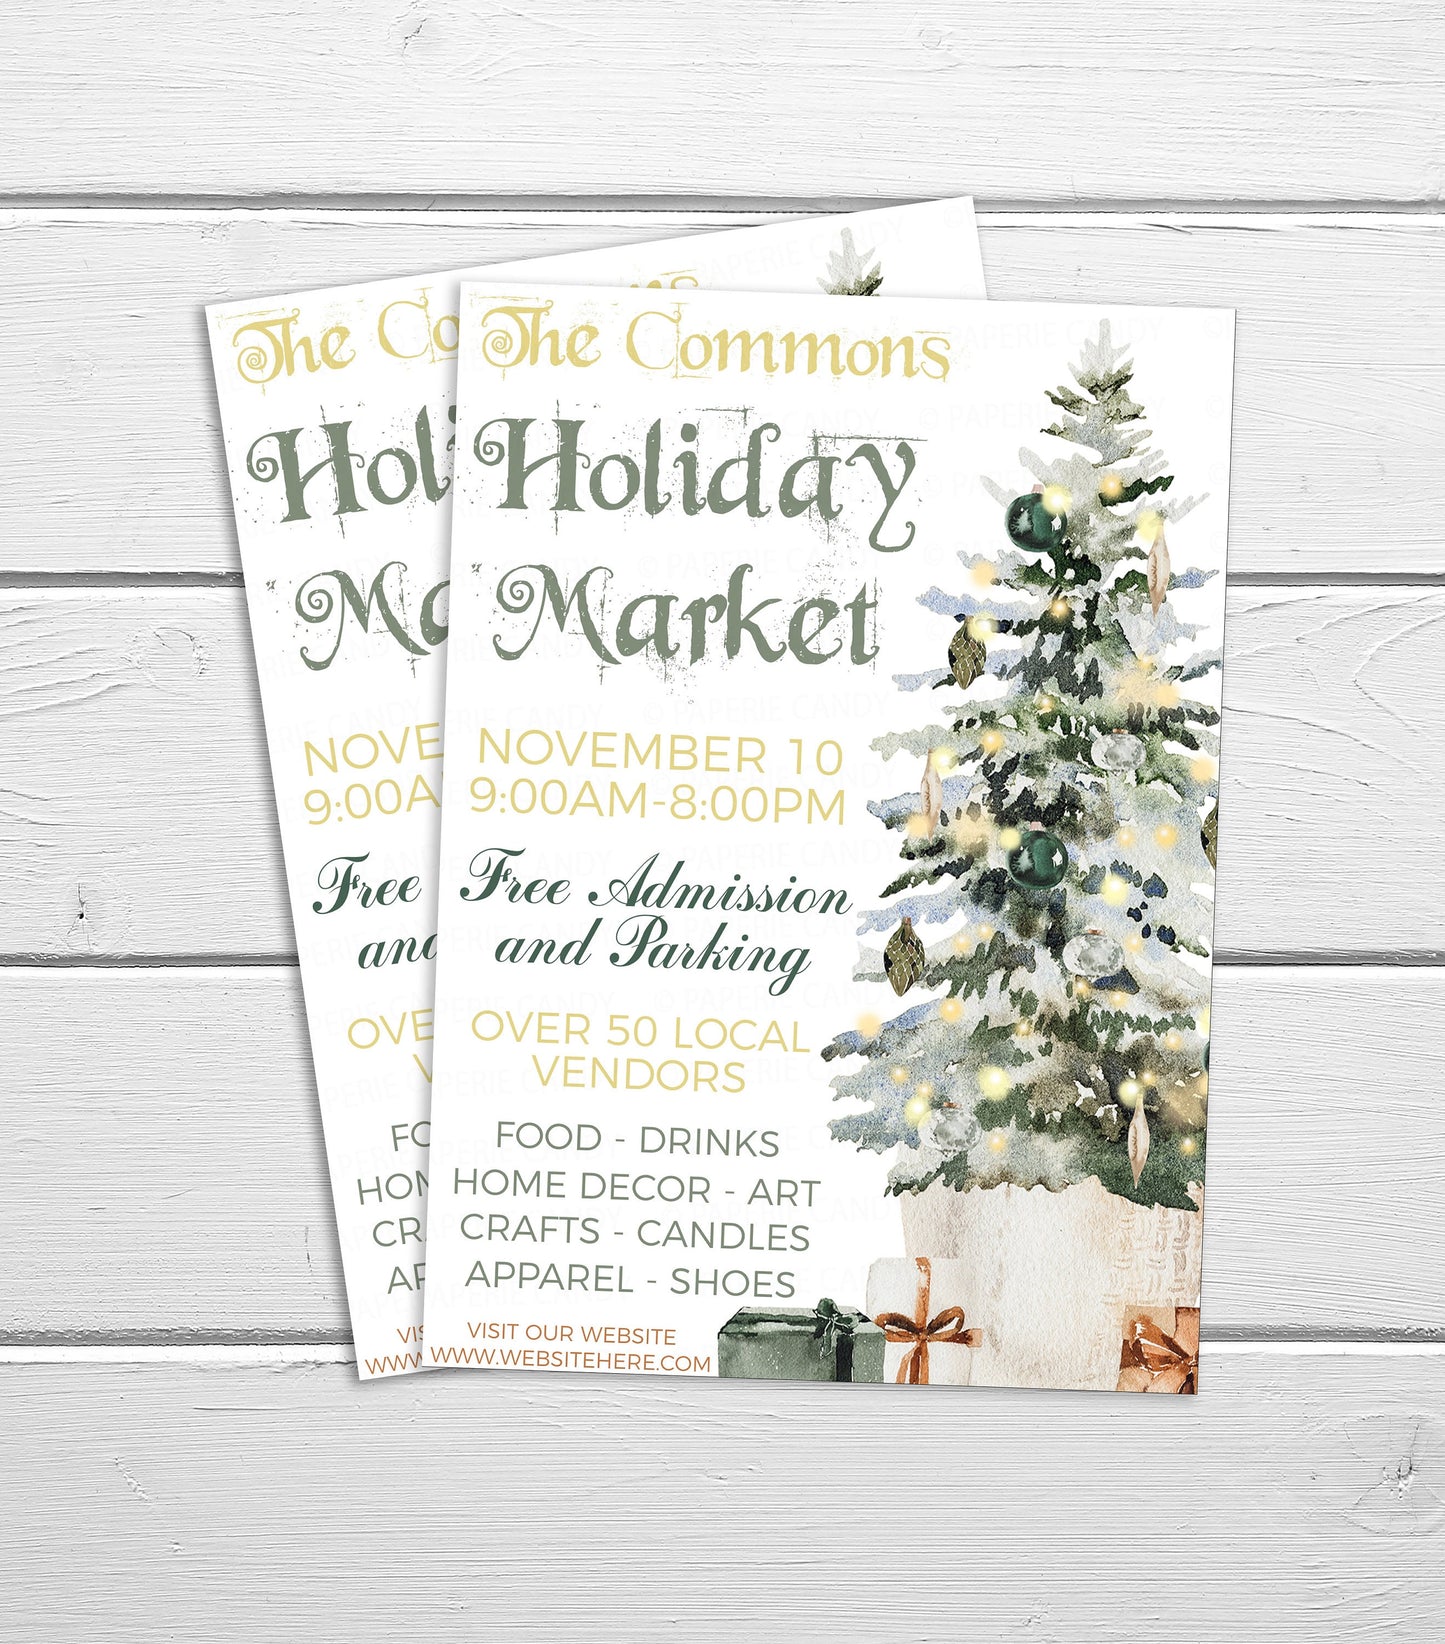 Editable Holiday Market Invitation, Winter Holiday Invite, Boutique Store Invite, Artisan Craft Fair, Christmas Open House Event, Printable